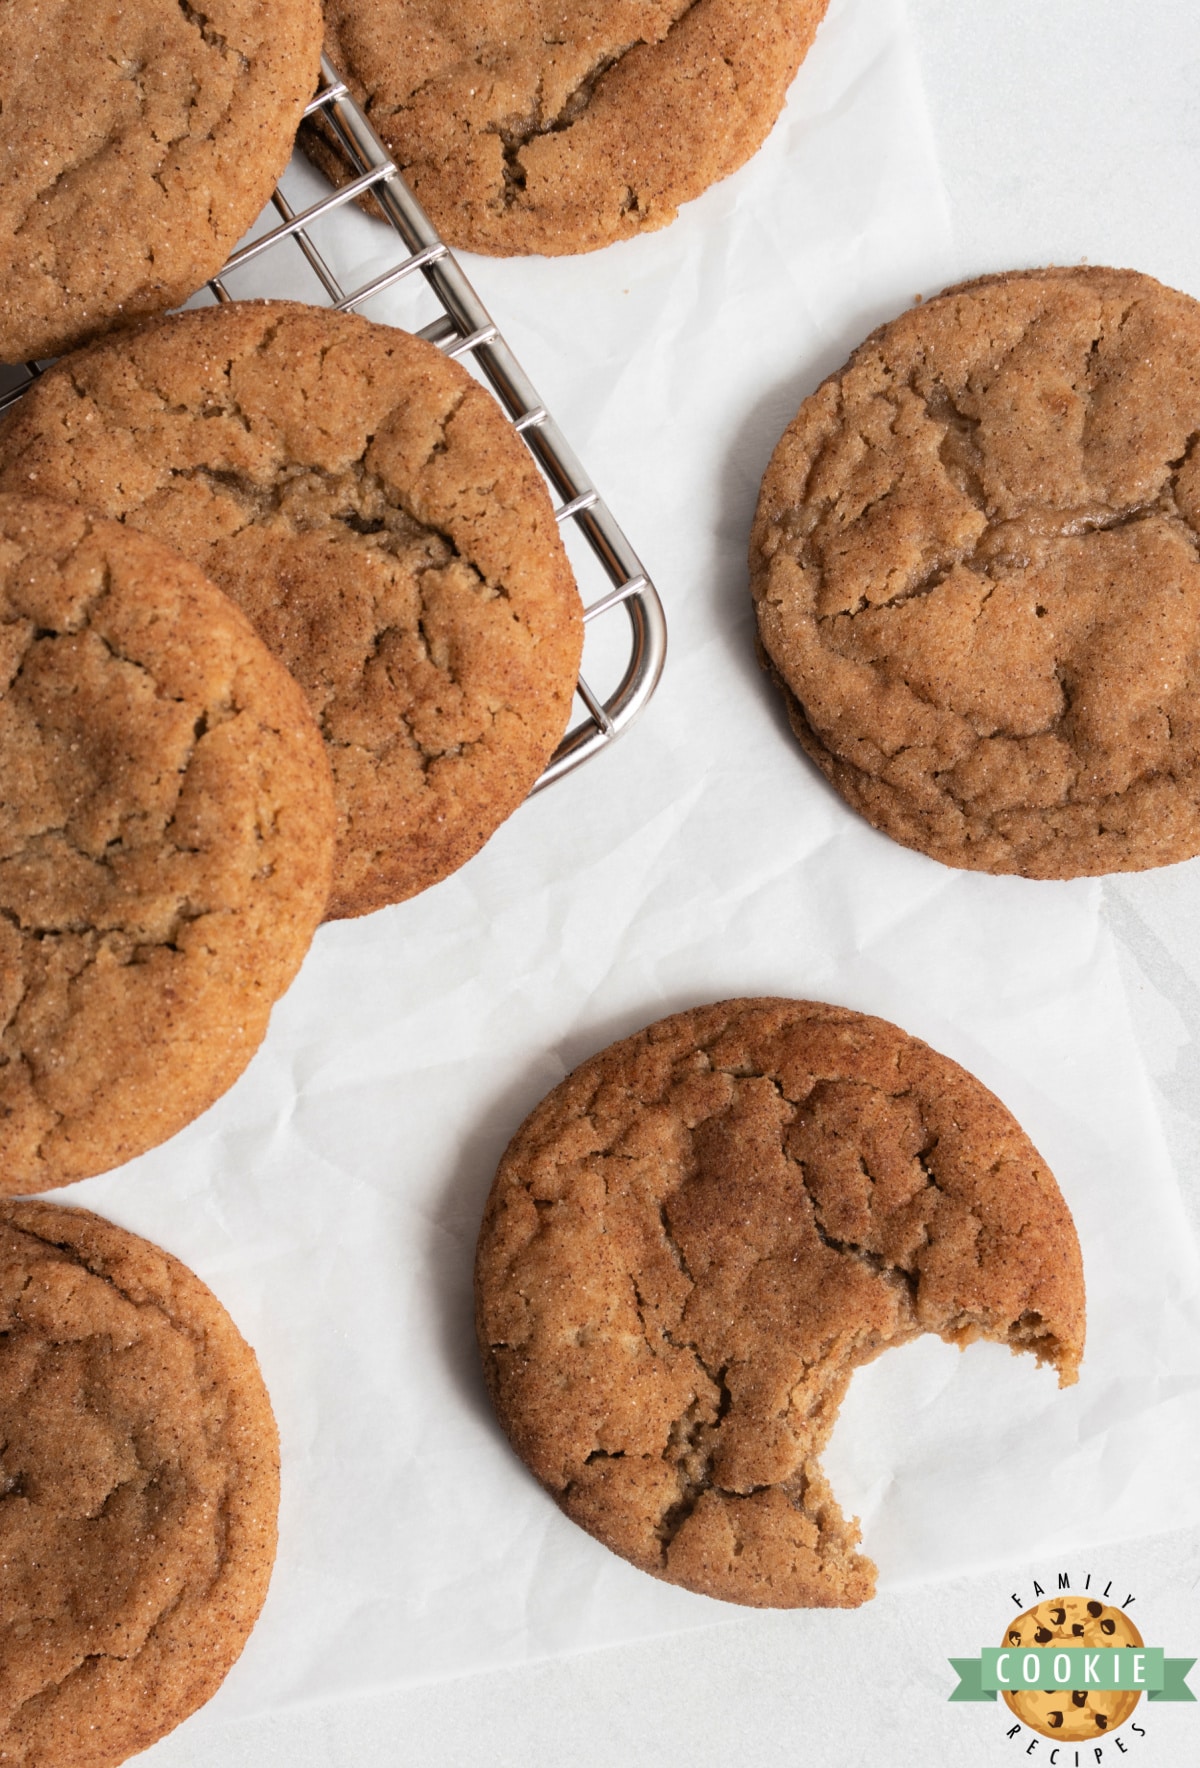 Snickerdoodle cookies made with apple butter